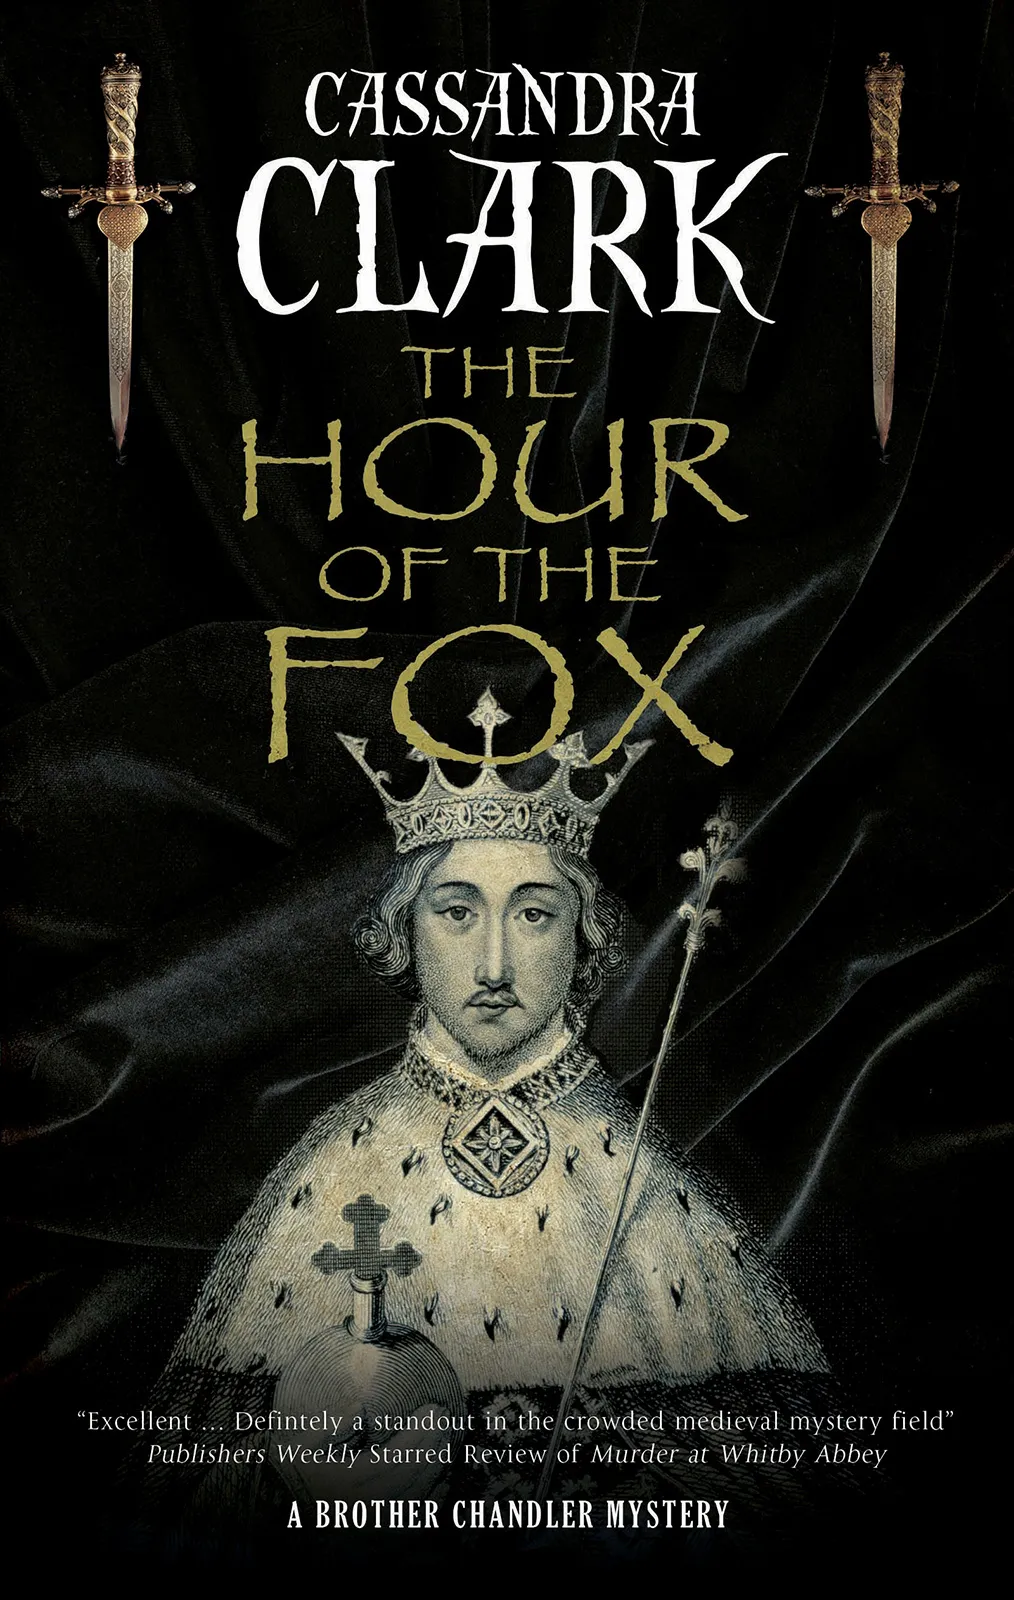 The Hour of the Fox (A Brother Chandler Mystery #1)